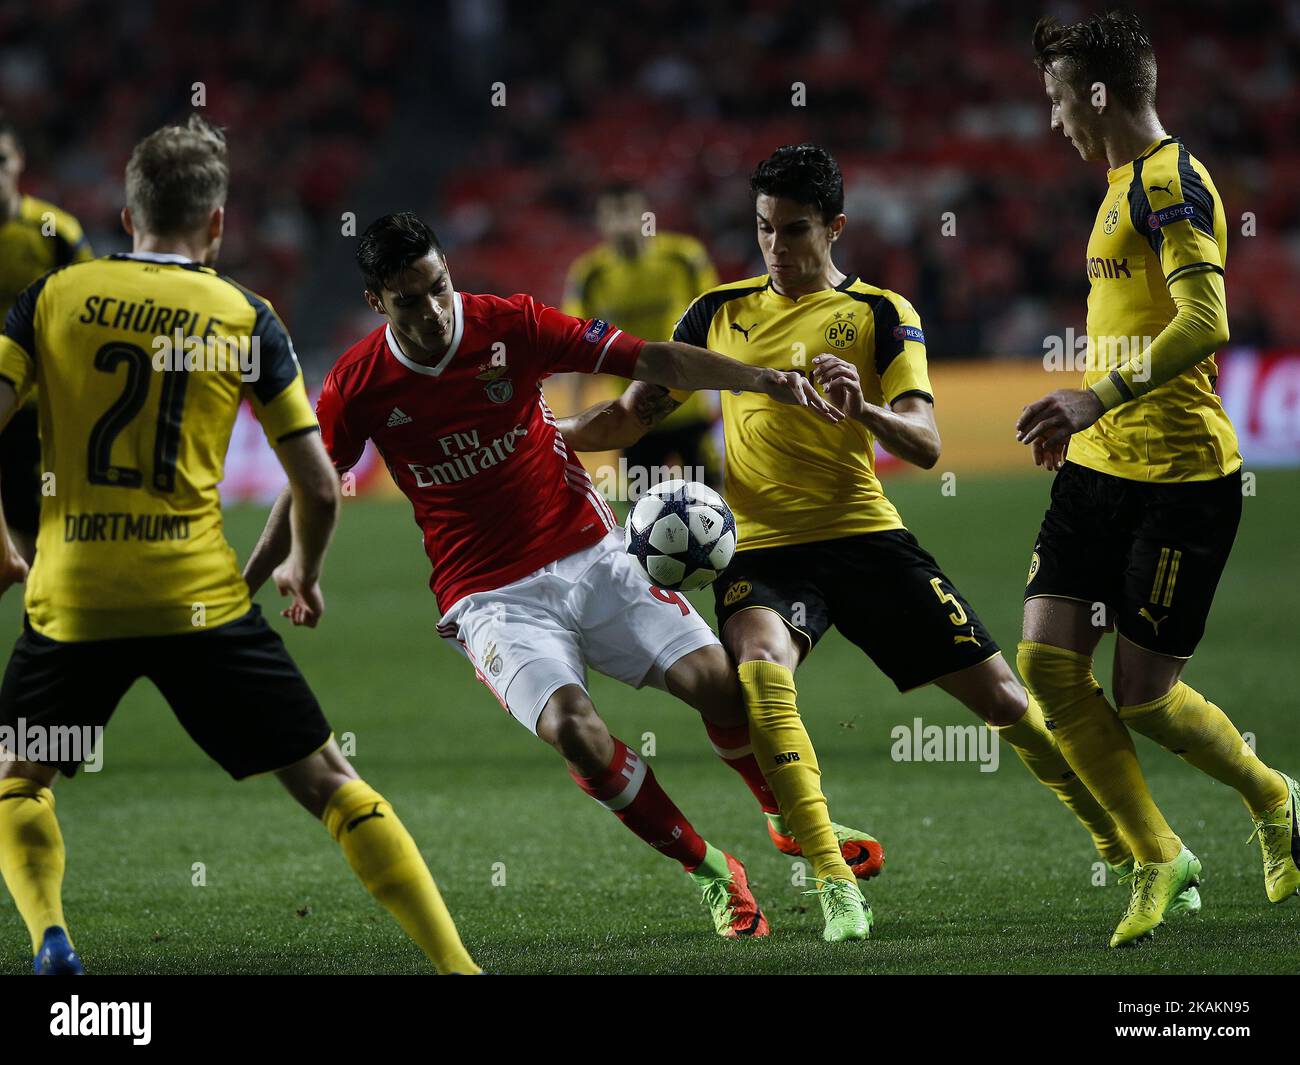 Benfica's forward Raul Jimenez (2nd L) vies for the ball with Dortmund's defender Marc Bartra (2nd R) during Champions League 2016/17 match between SL Benfica vs BVB Borussia Dortmund, in Lisbon, on February 14, 2017. (Photo by Carlos Palma/NurPhoto) *** Please Use Credit from Credit Field *** Stock Photo